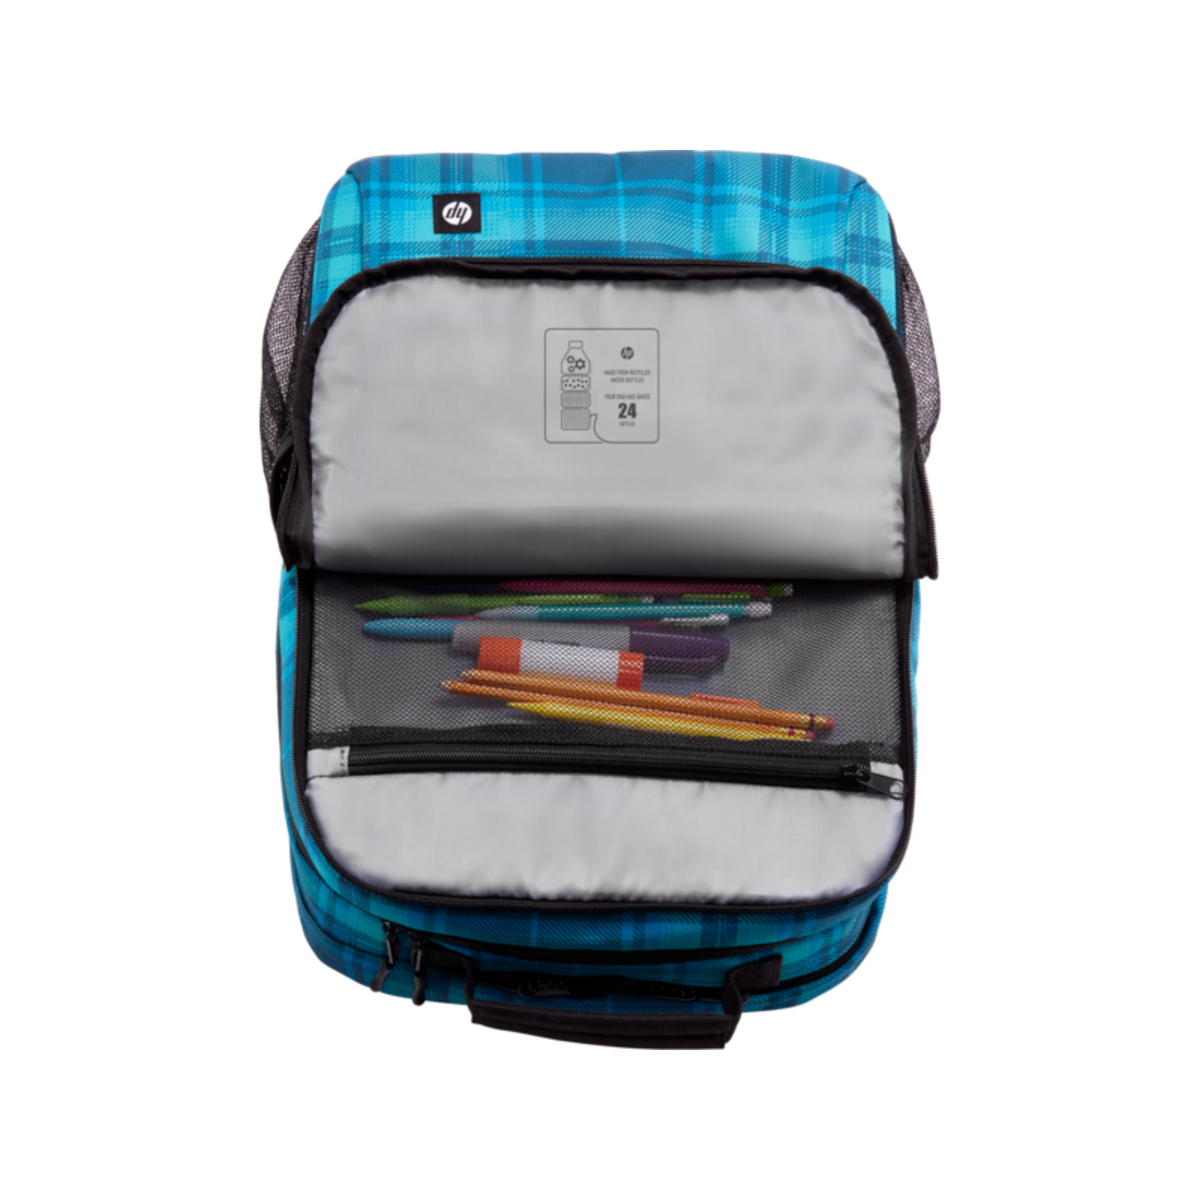 HP Campus Padded Backpack, XL, Blue, 7J594AA